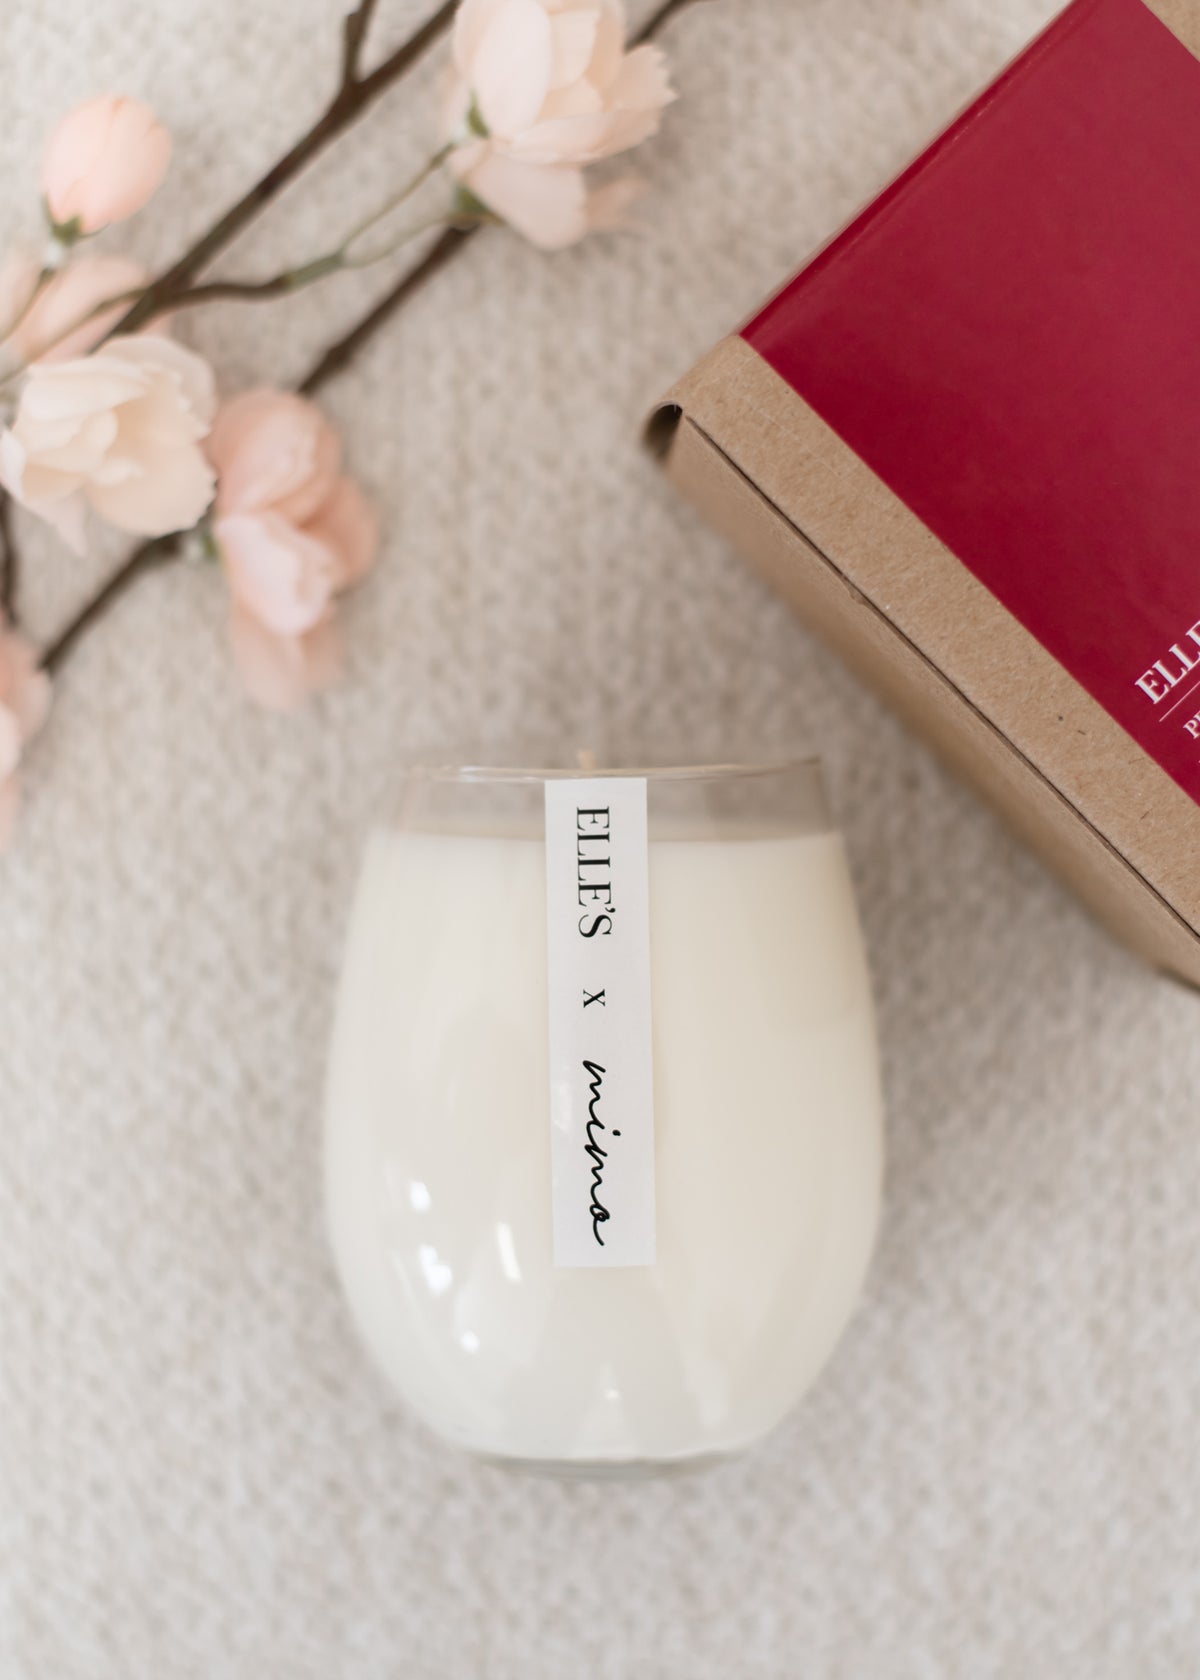 The Elle's Exclusive Wine Glass Candle